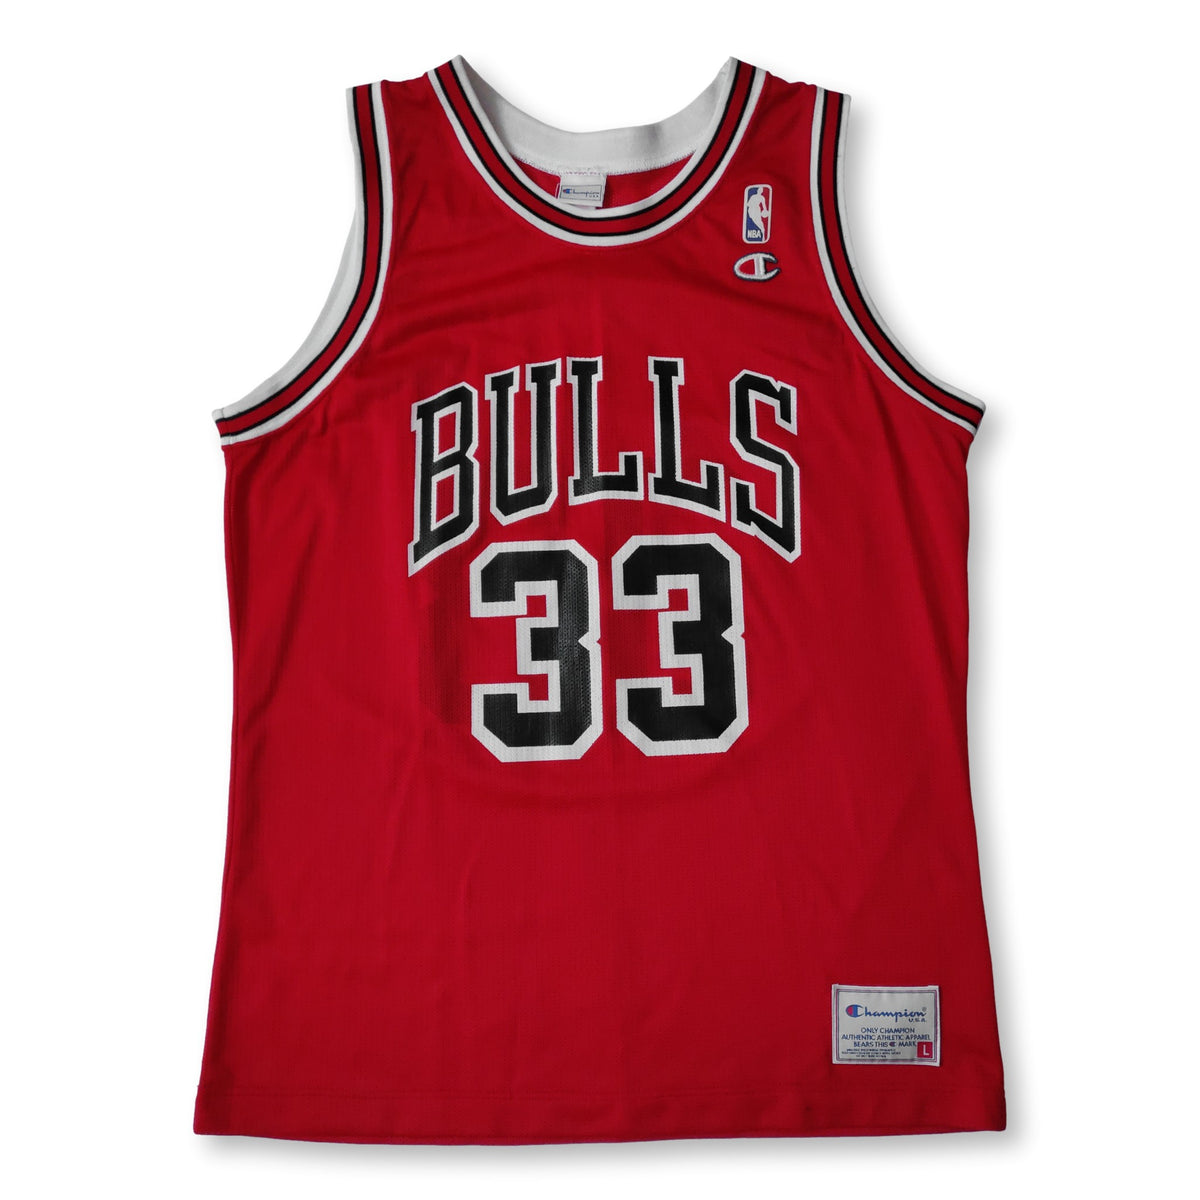 1991-94 CHICAGO BULLS PIPPEN #33 CHAMPION JERSEY (AWAY) L - Classic  American Sports